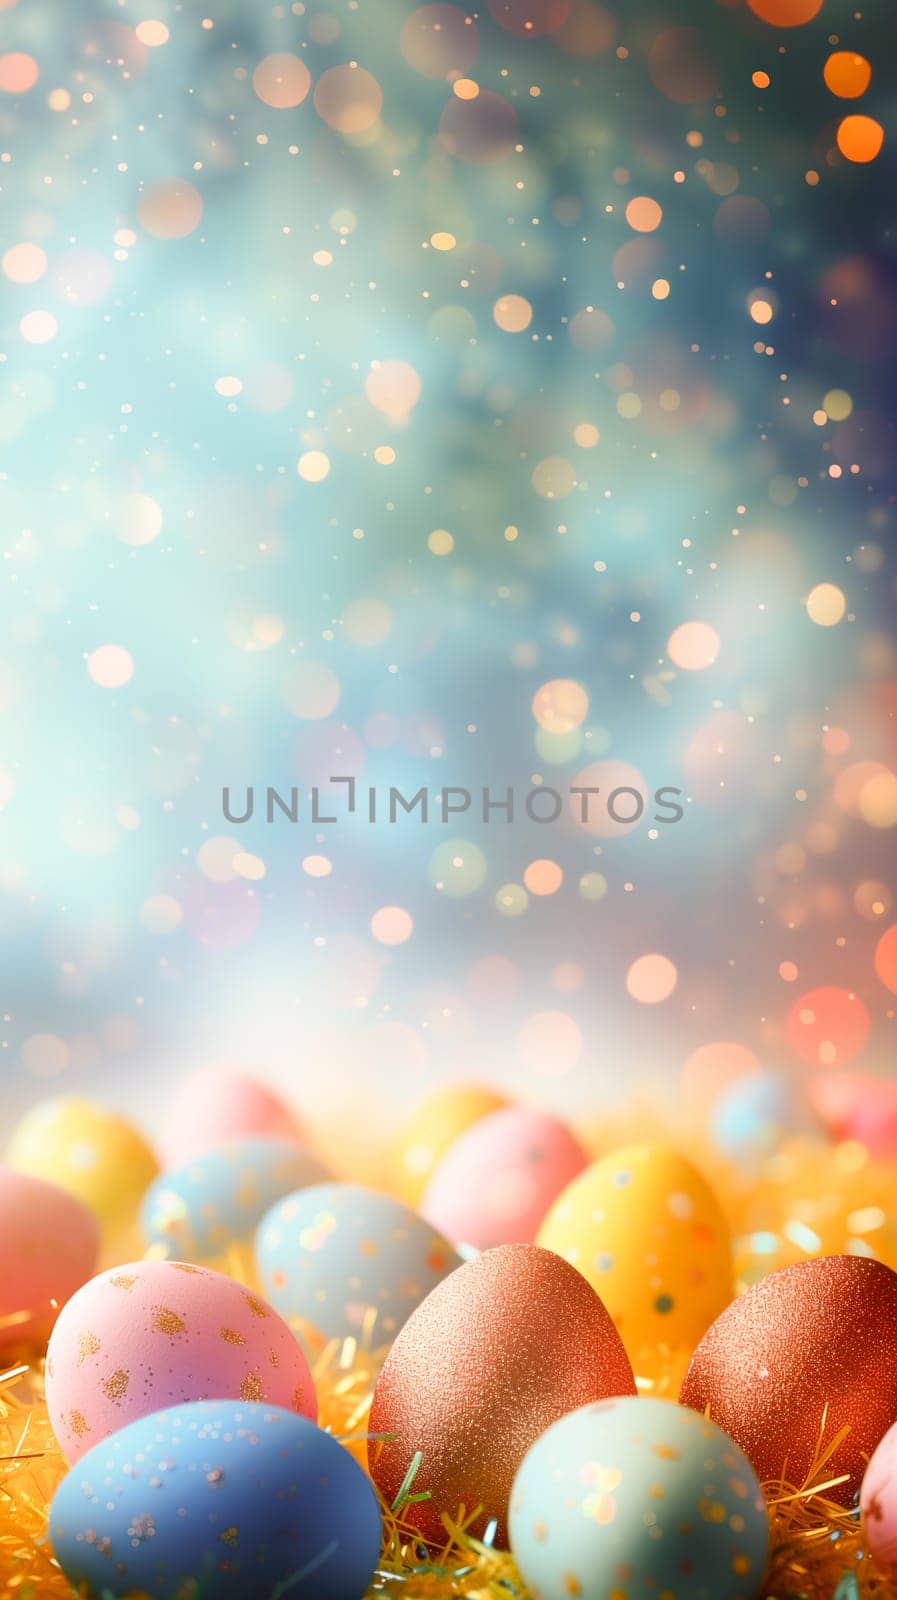 Easter eggs in grass with sunlight background by Dustick